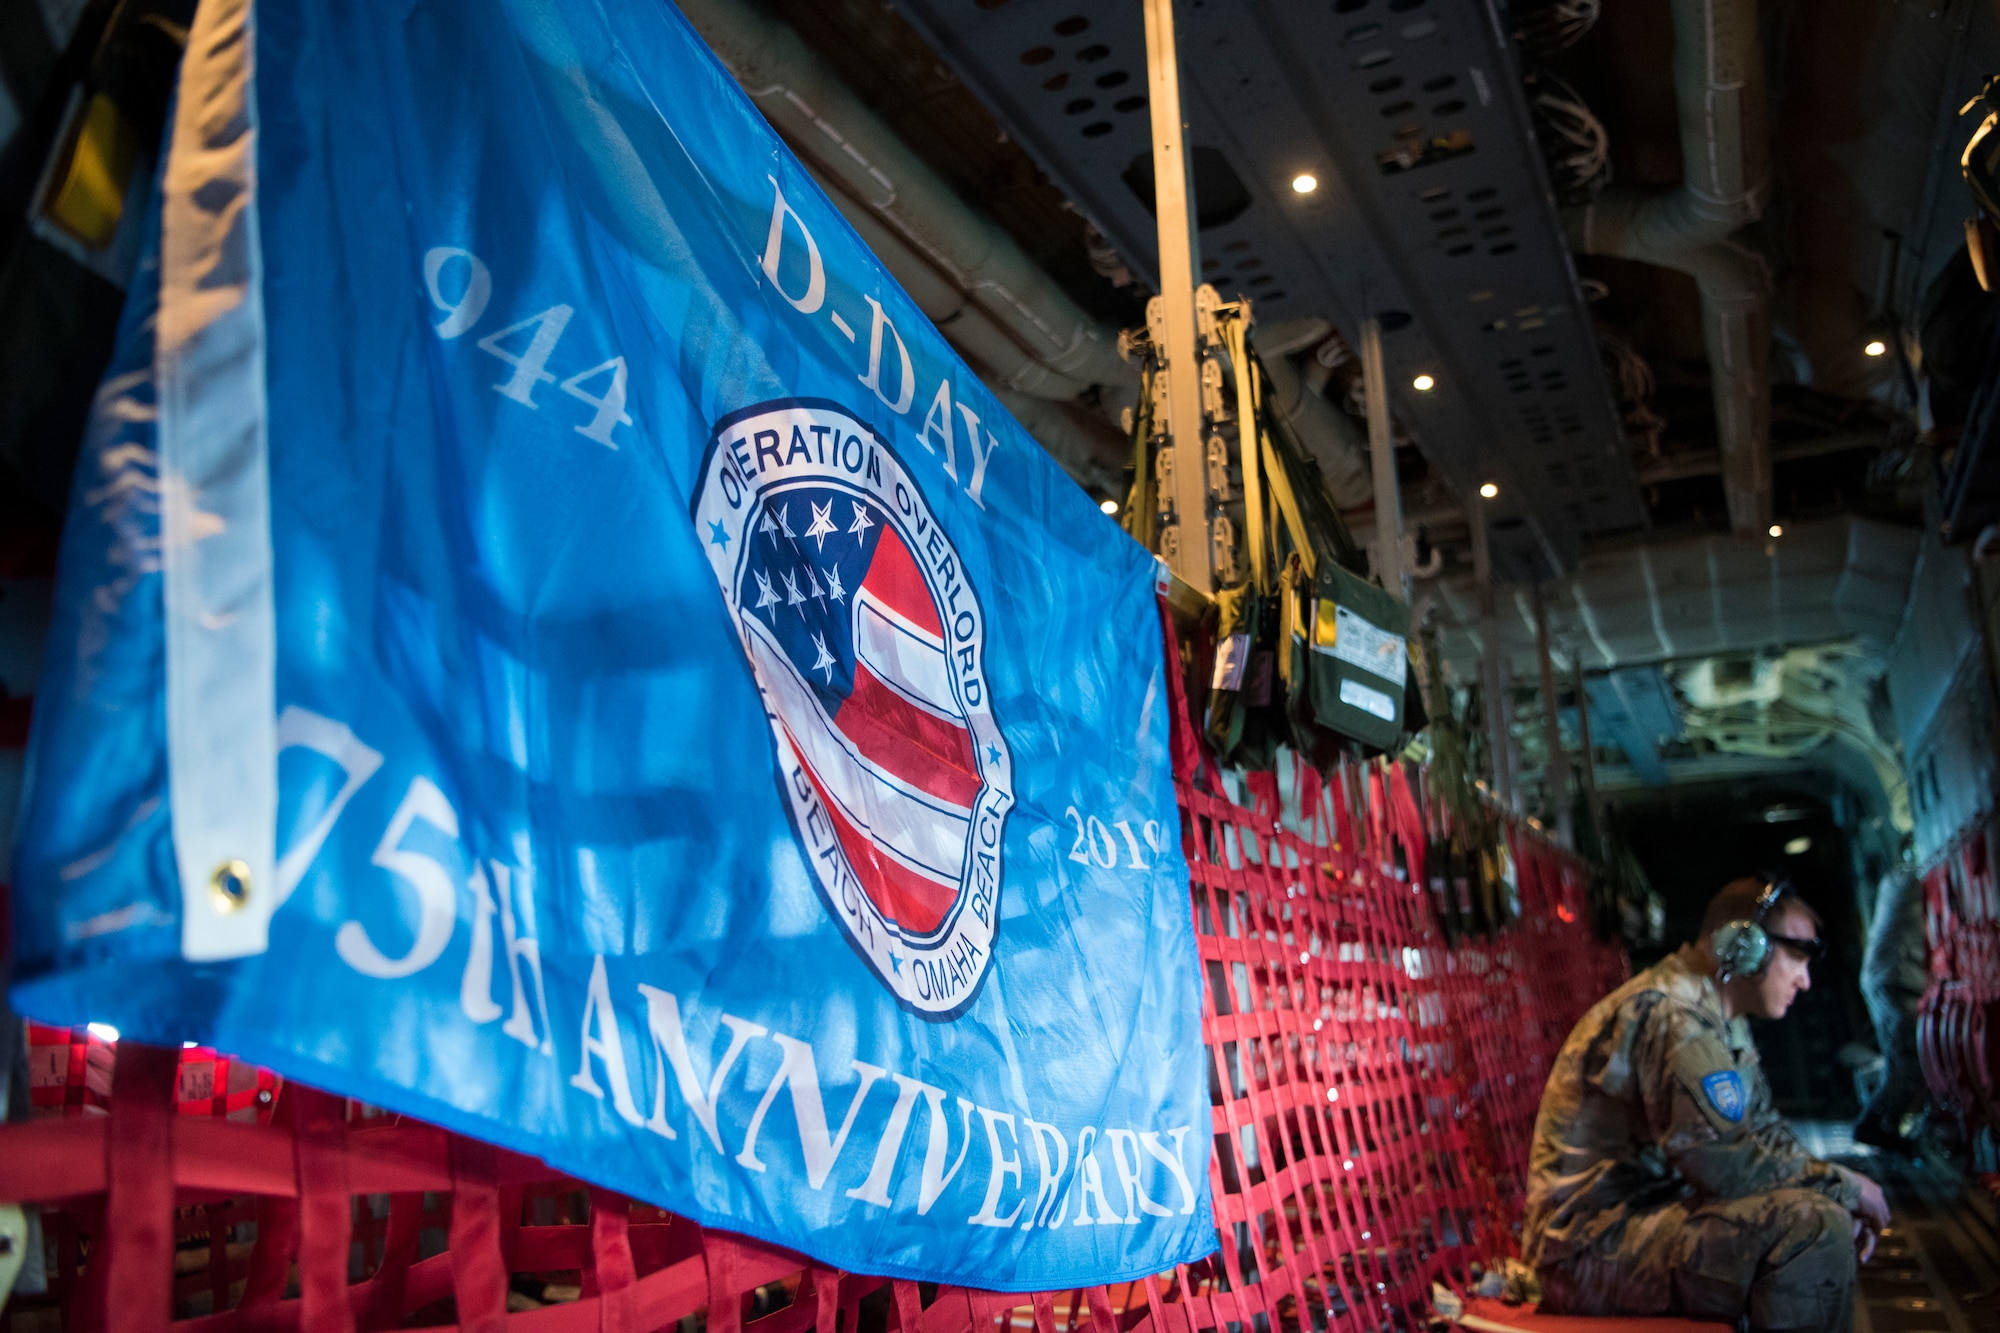 A U.S. Air Force service member sits on-board a C-130J Super Hercules during an eight-ship flyover of the Normandy-American Cemetery and Memorial in Colleville-sur-Mer, France, June 6, 2019. 2019 signifies the 75th anniversary of D-Day, June 6, 1944, where tens of thousands of Allied service members stormed the beaches of Normandy, beginning the liberation of France and Europe. (U.S. Air Force photo by Senior Airman Kristof J. Rixmann)